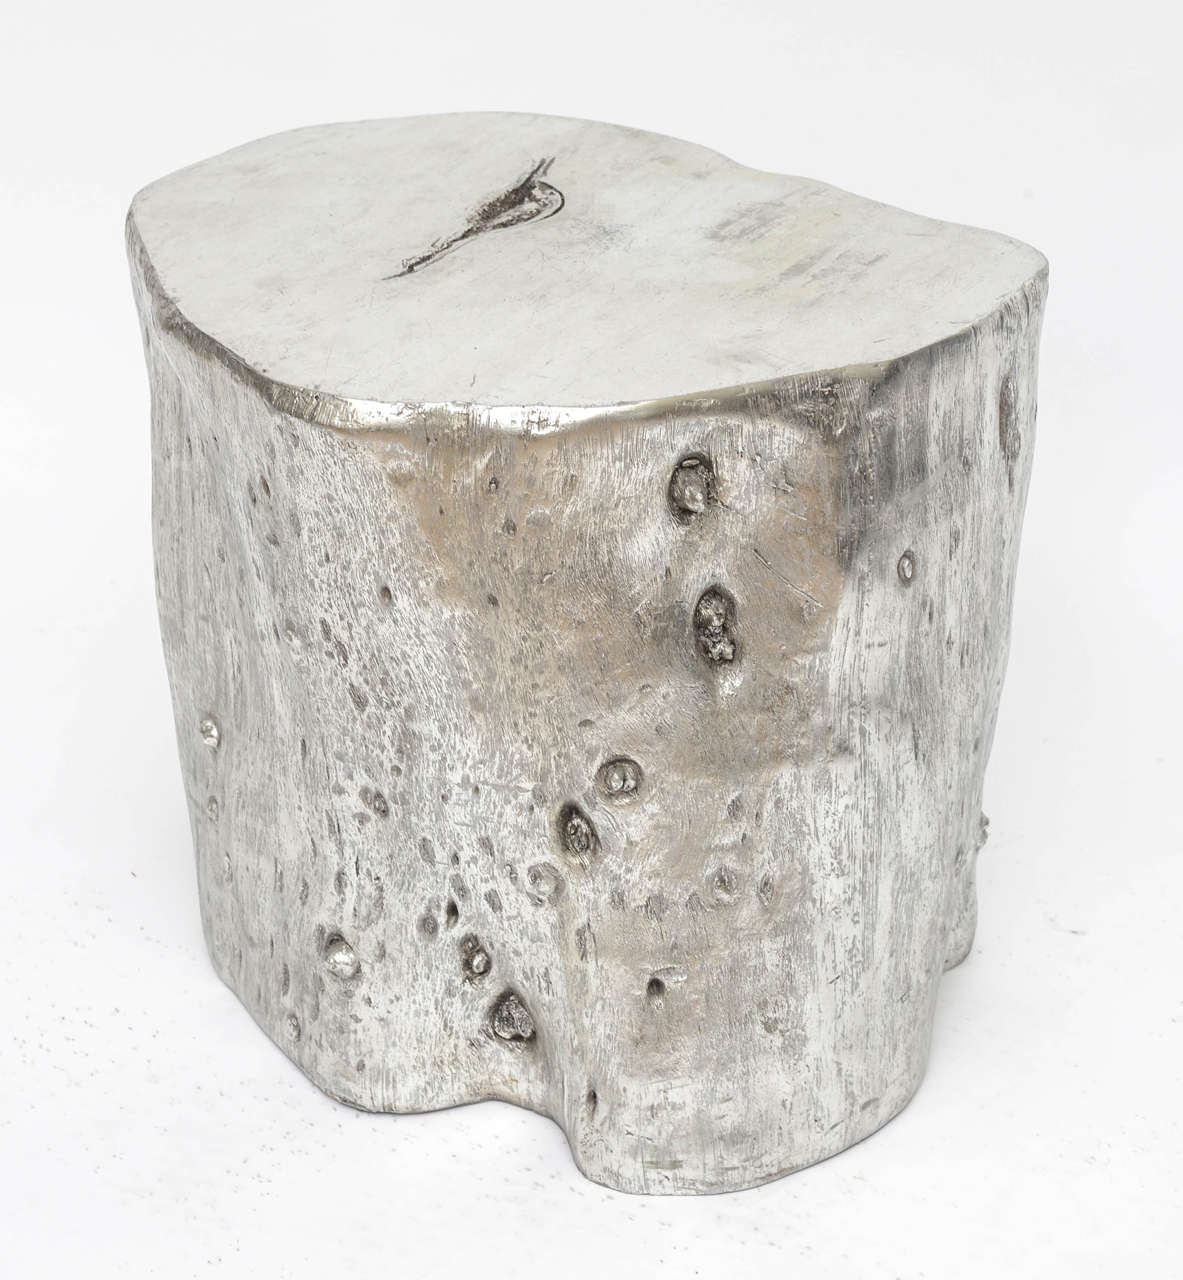 Organic tree trunk-shaped, side or end table, in a silver leaf and platinum patina. Cast fiberglass and weighted, with a flat surfaced top, knots, textures and crevices mimicking a real petrified wood trunk.